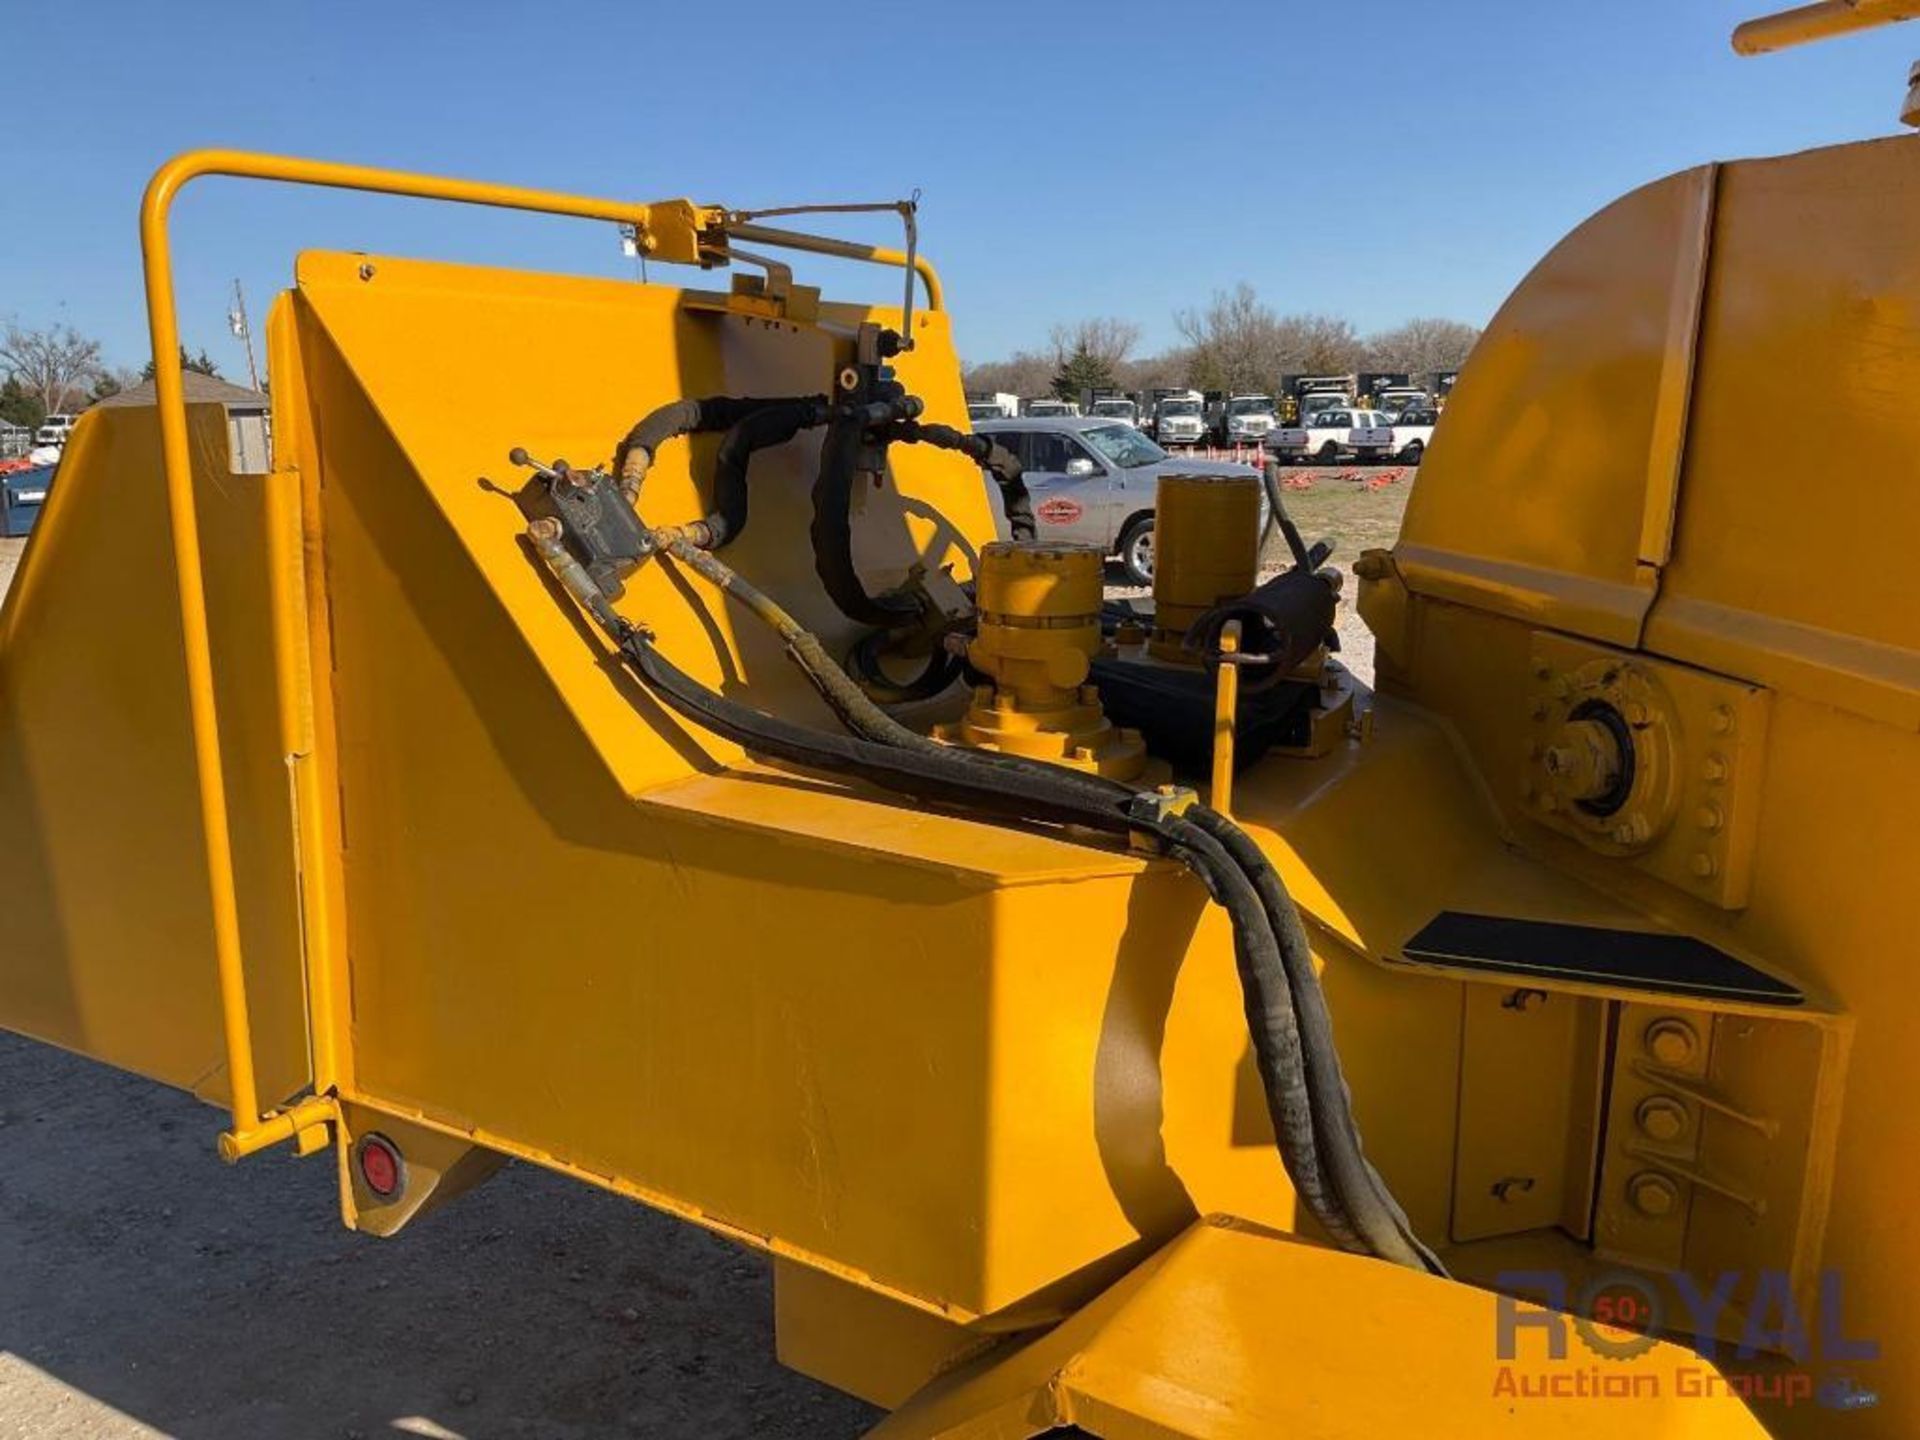 1995 Vermeer BC1230 S/A Towable Wood Chipper - Image 10 of 17